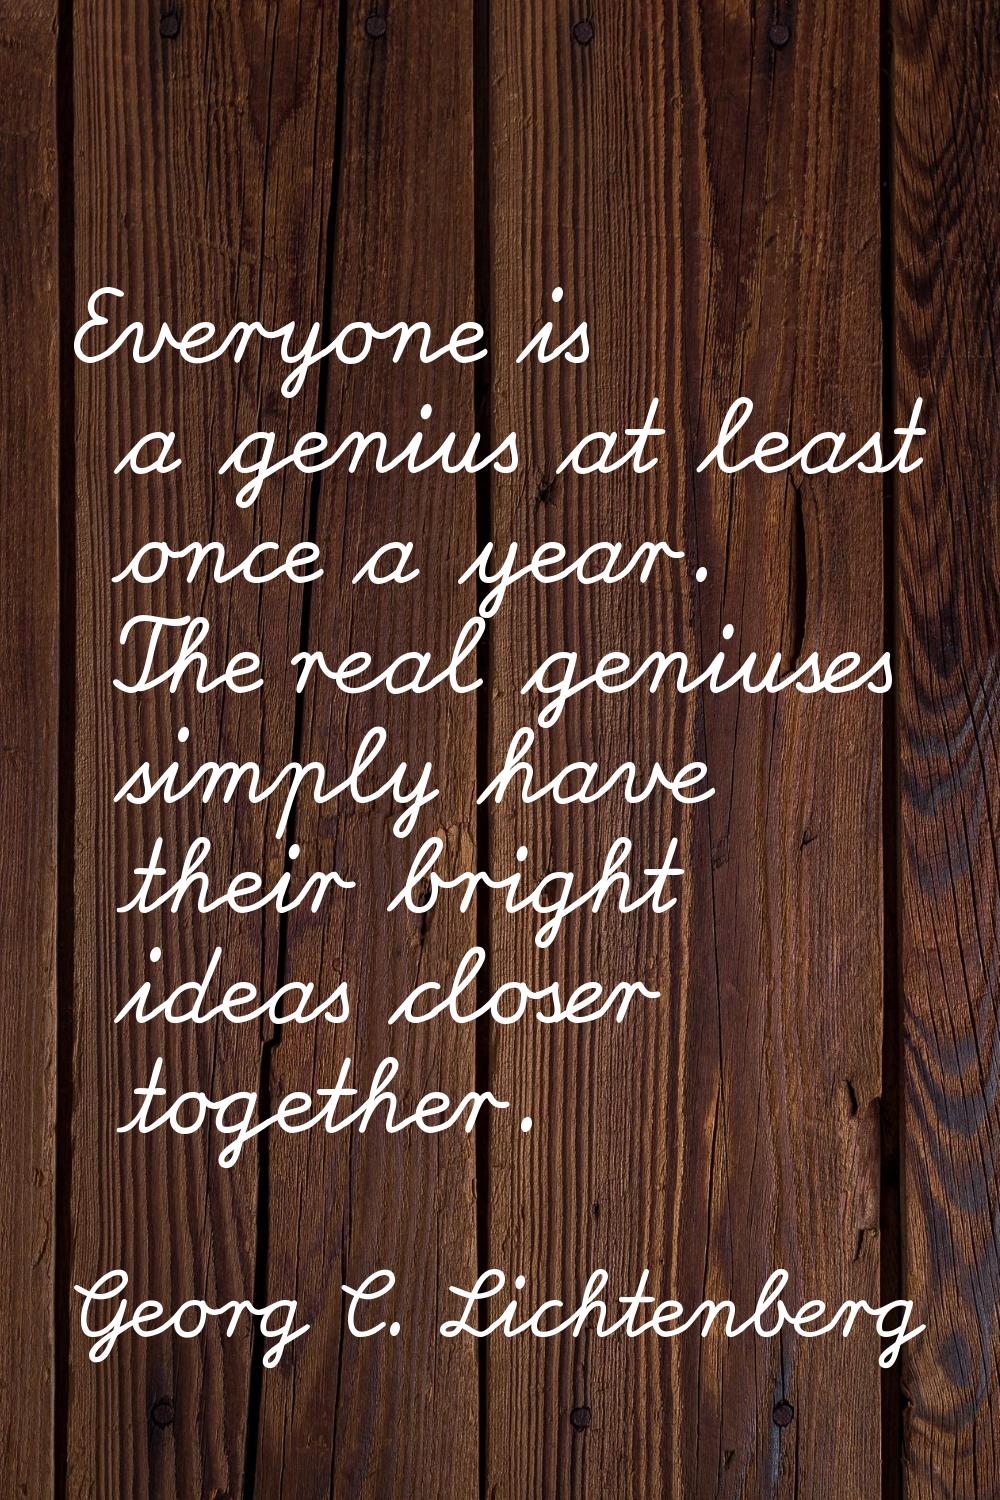 Everyone is a genius at least once a year. The real geniuses simply have their bright ideas closer 